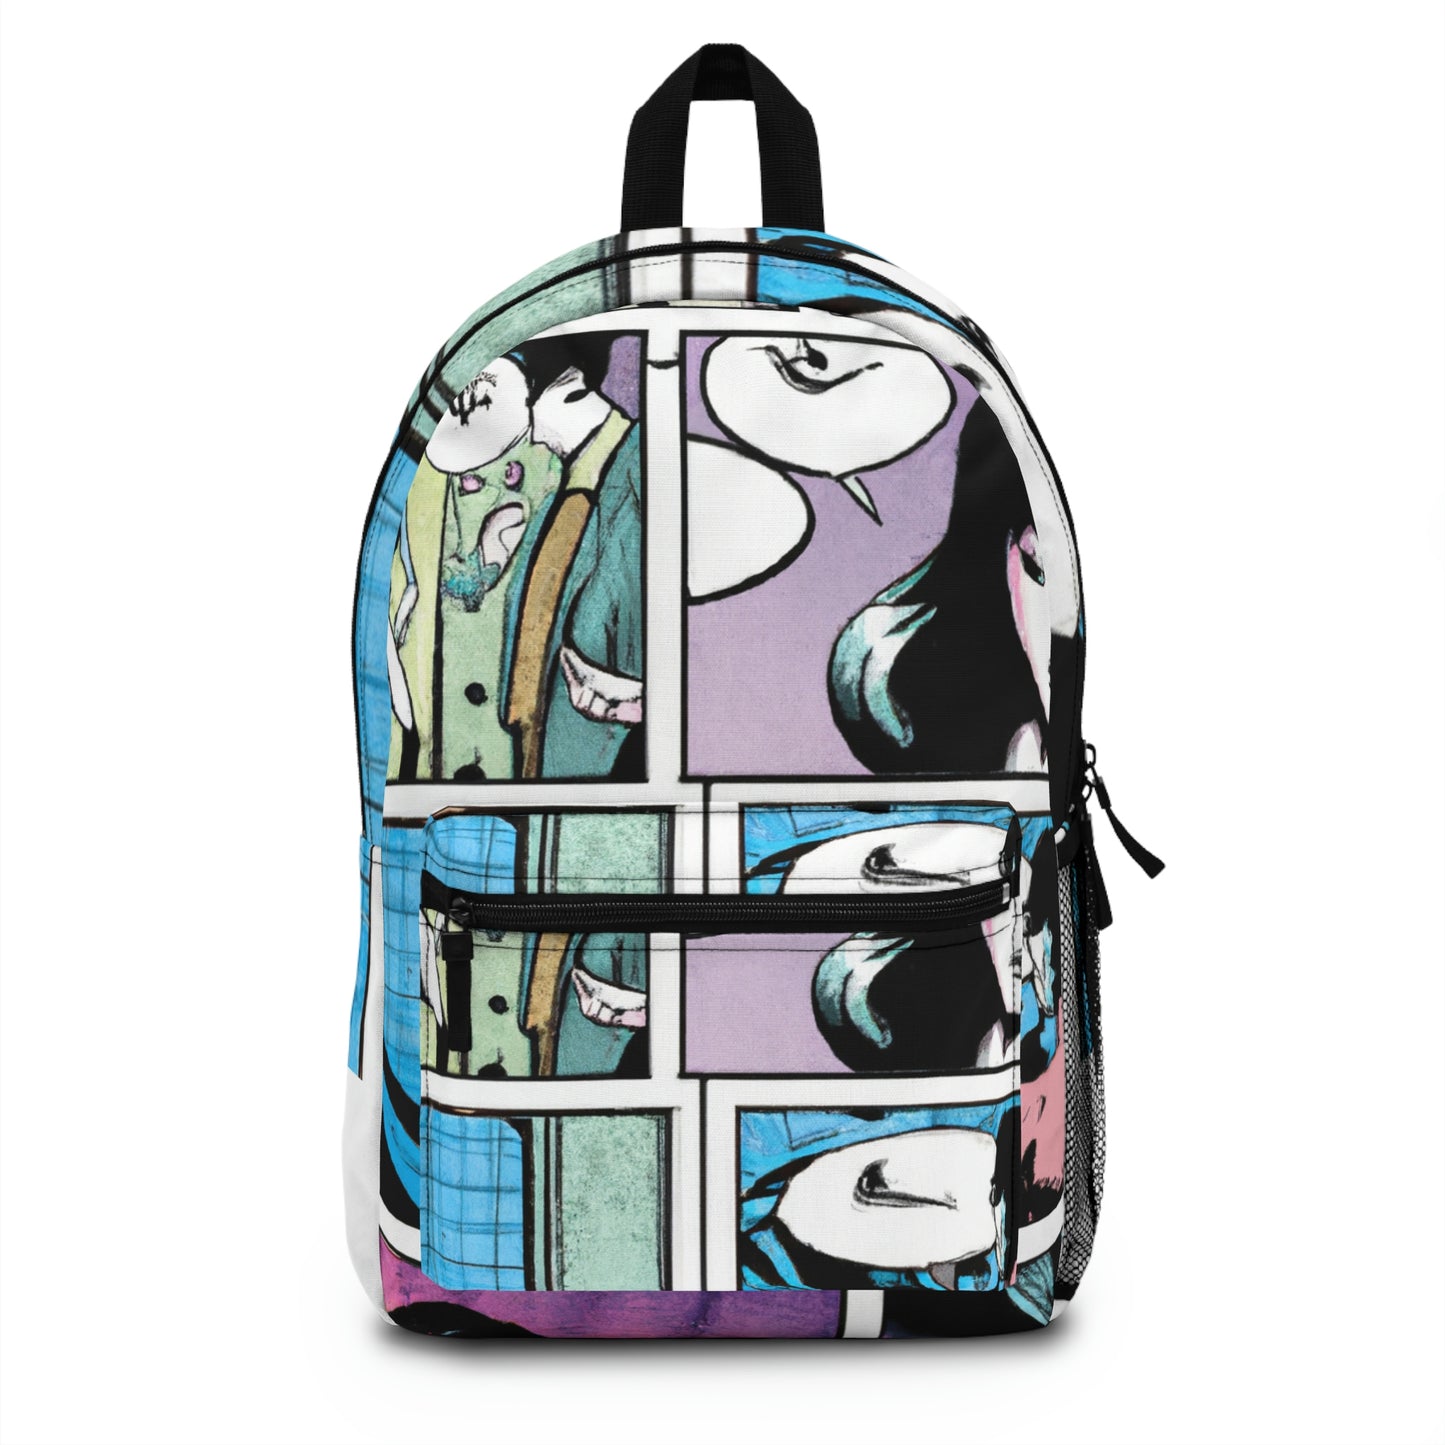 Adonis Hero - Comic Book Backpack 1 of 1 Collectible